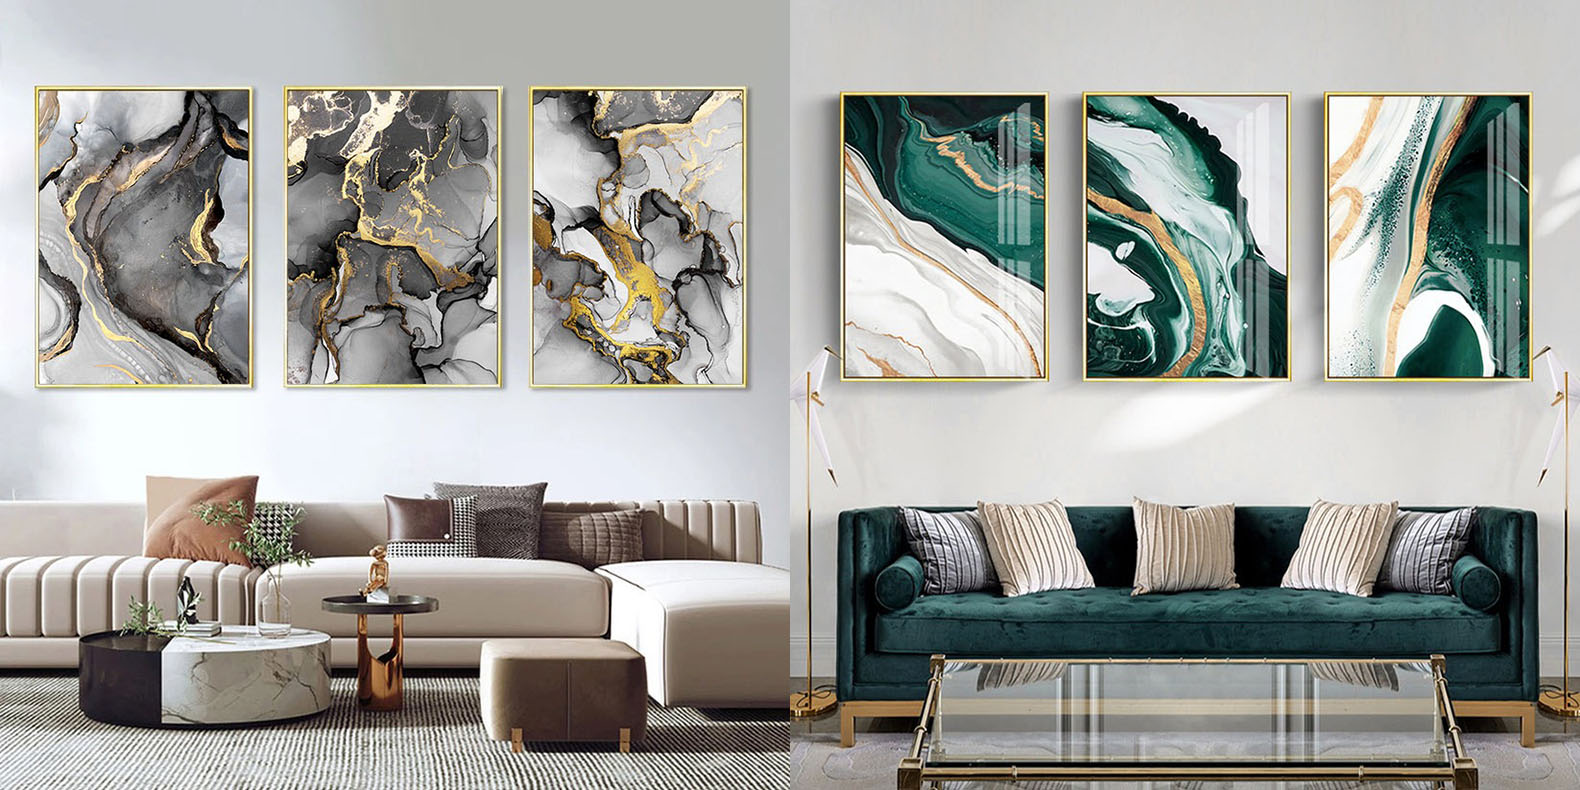 Shop The Latest Deals on Nordic Wall Art Canvas Prints and Posters Modern Abstract Minimalist Wall Decor For Contemporary Scandinavian Interior Design